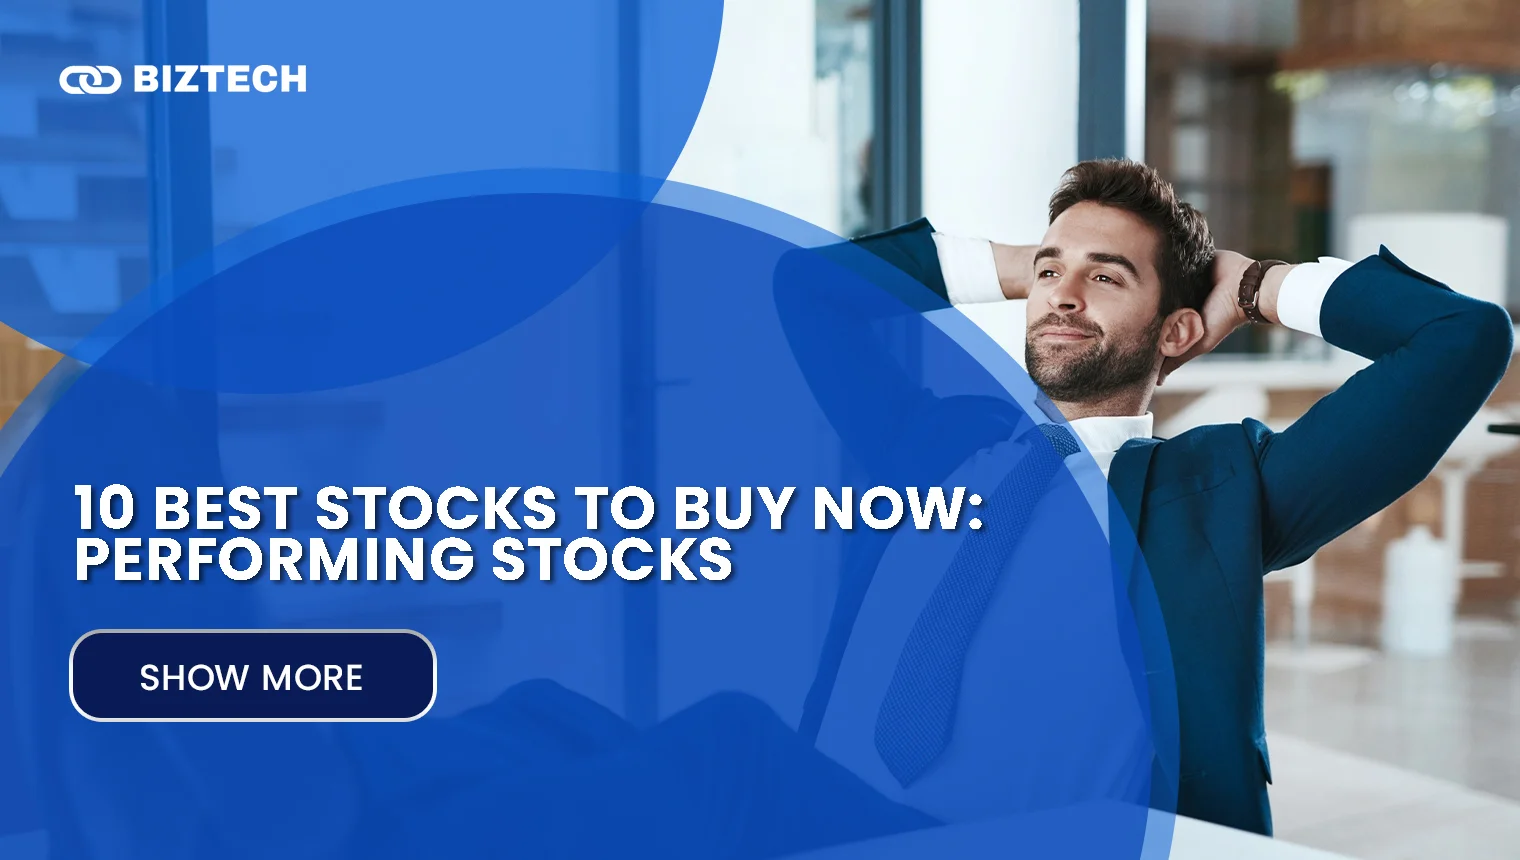 10 Best Stocks to Buy Now Performing Stocks